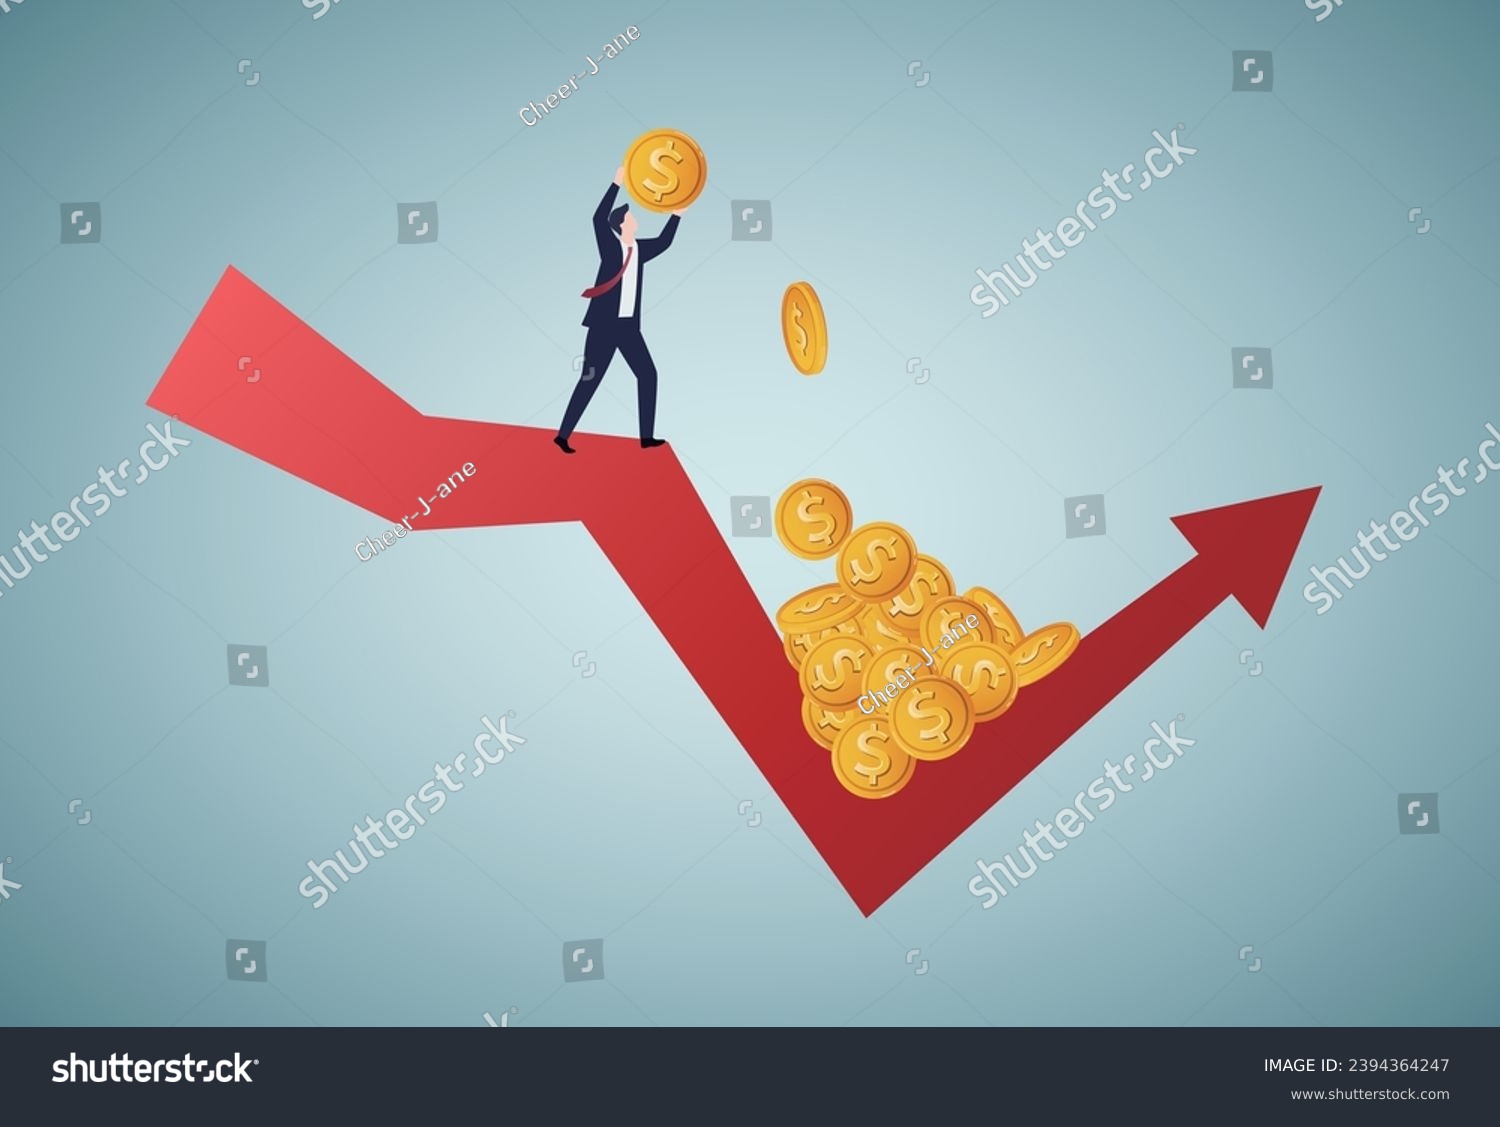 SVG of Buy on the dip, purchase stock when price drop, trader signal to invest, make profit from market collapse concept, smart businessman investor buy stock with down arrow graph. svg